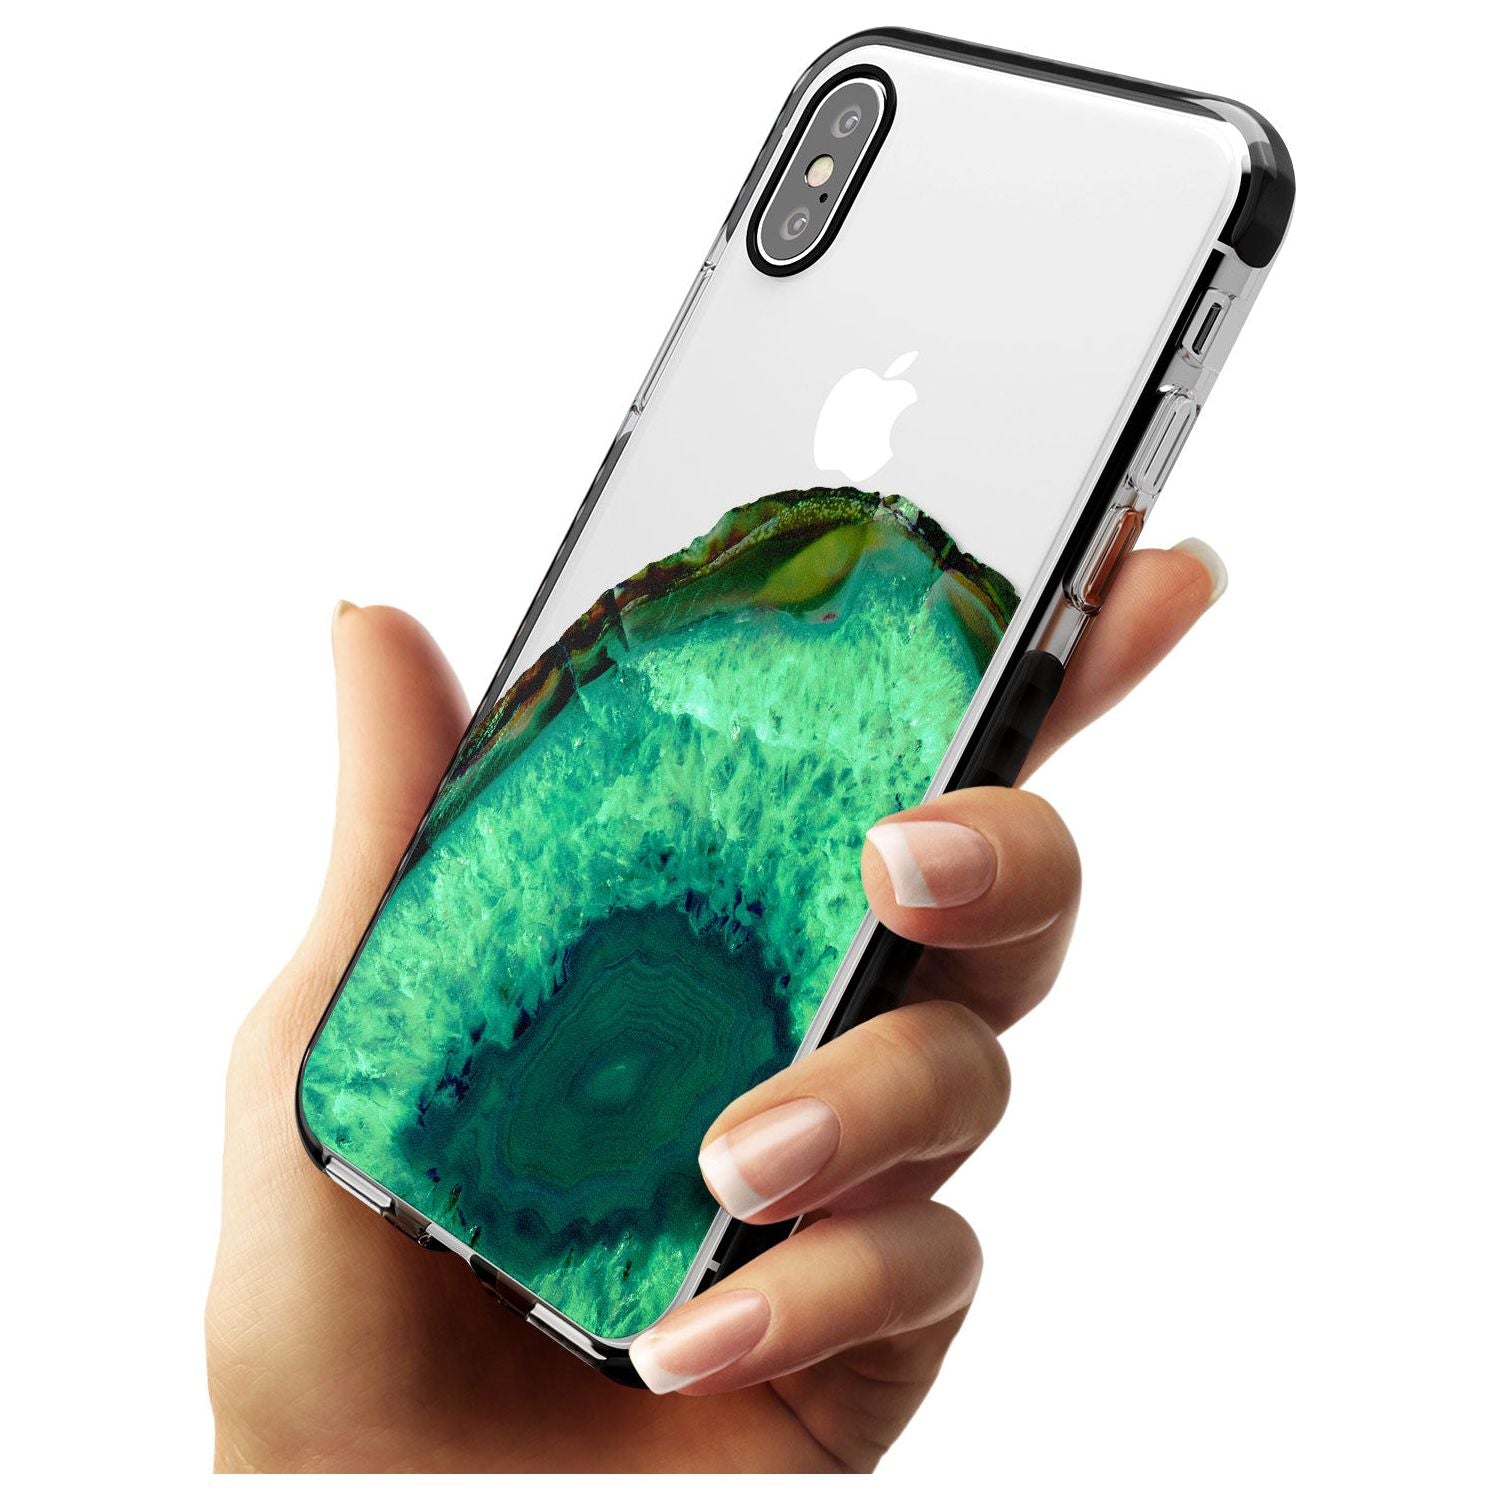 Emerald Green Gemstone Crystal Clear Design Black Impact Phone Case for iPhone X XS Max XR